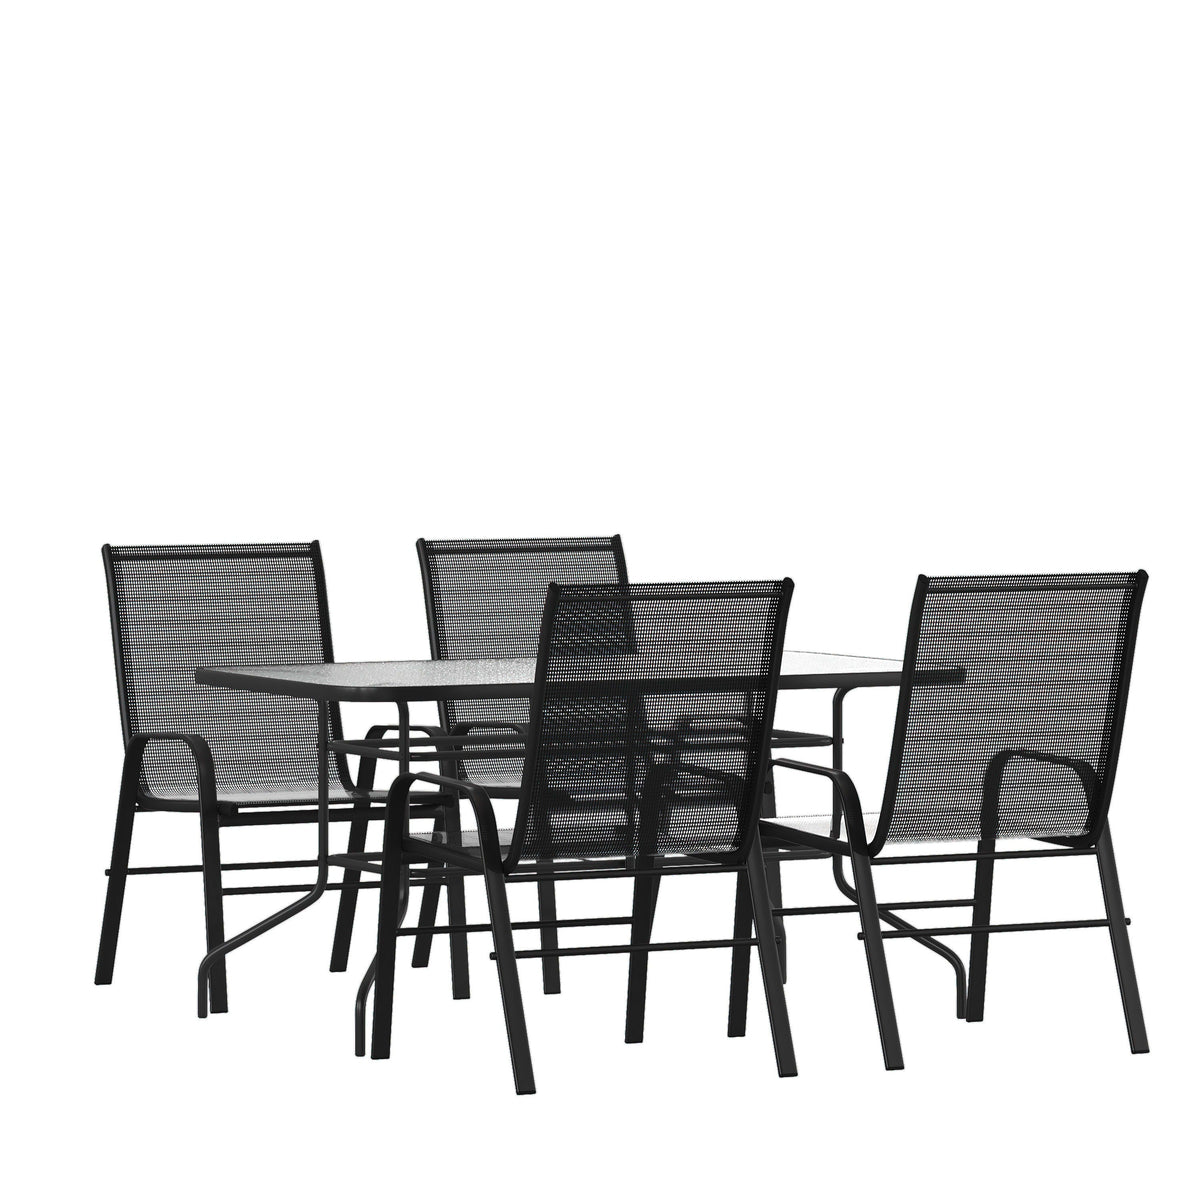 Black |#| 5 Piece Patio Dining Set - 55inch Glass Patio Table, 4 Black Flex Stack Chairs